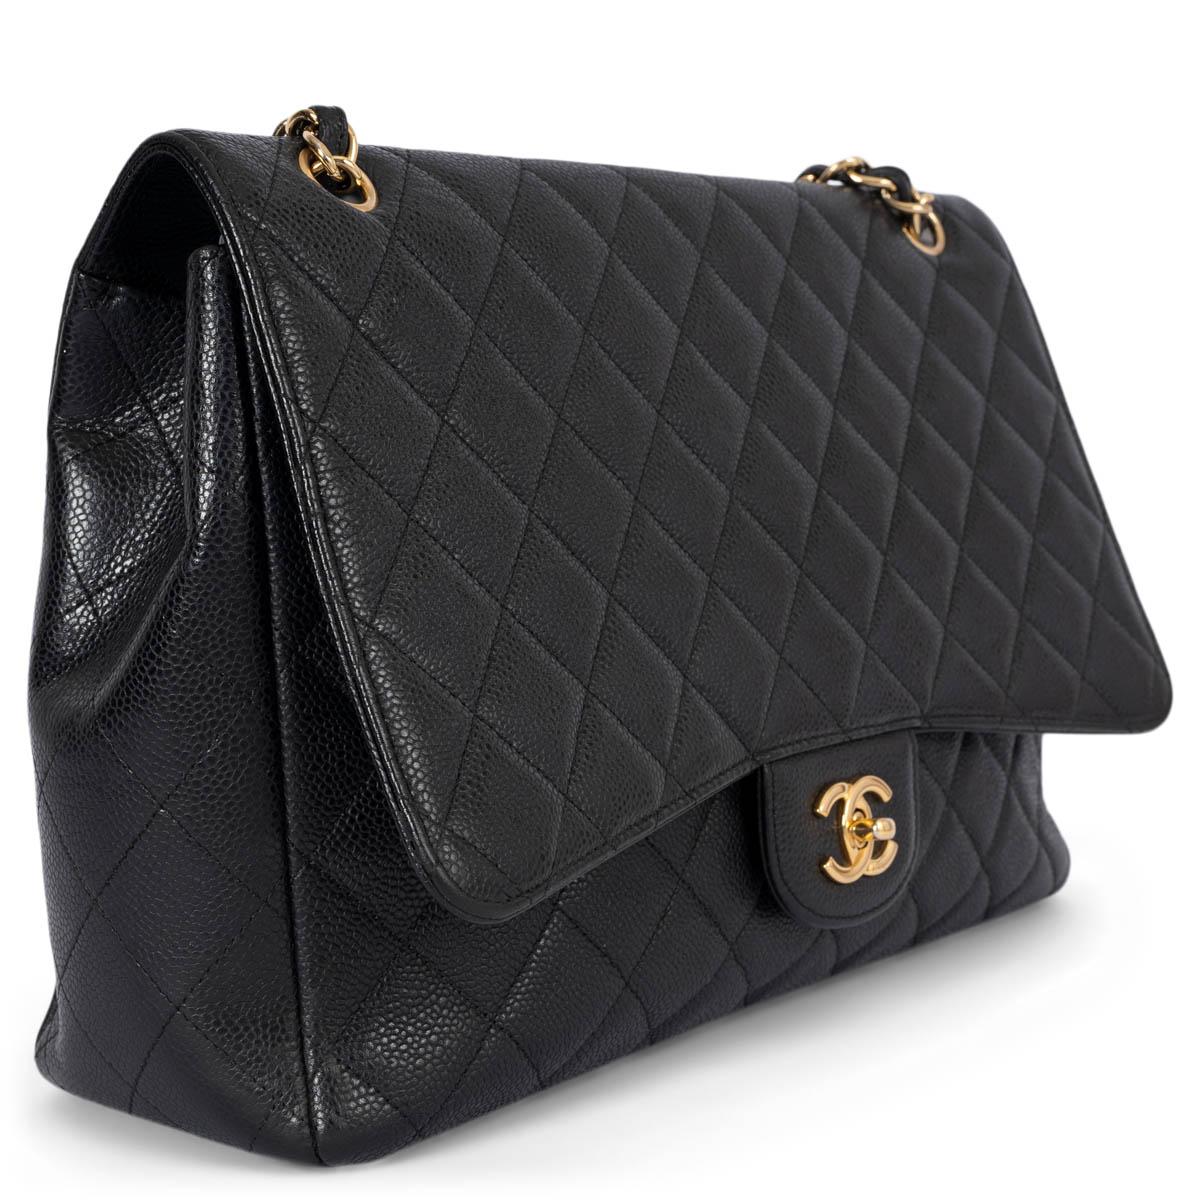 100% authentic Chanel Maxi Classic Timeless Single Flap Bag in black caviar leather featuring gold-tone hardware. Open pocket on the back. Closes with classic CC-turn-lock on the front. Lined in black lambskin with one zipper pocket and one open